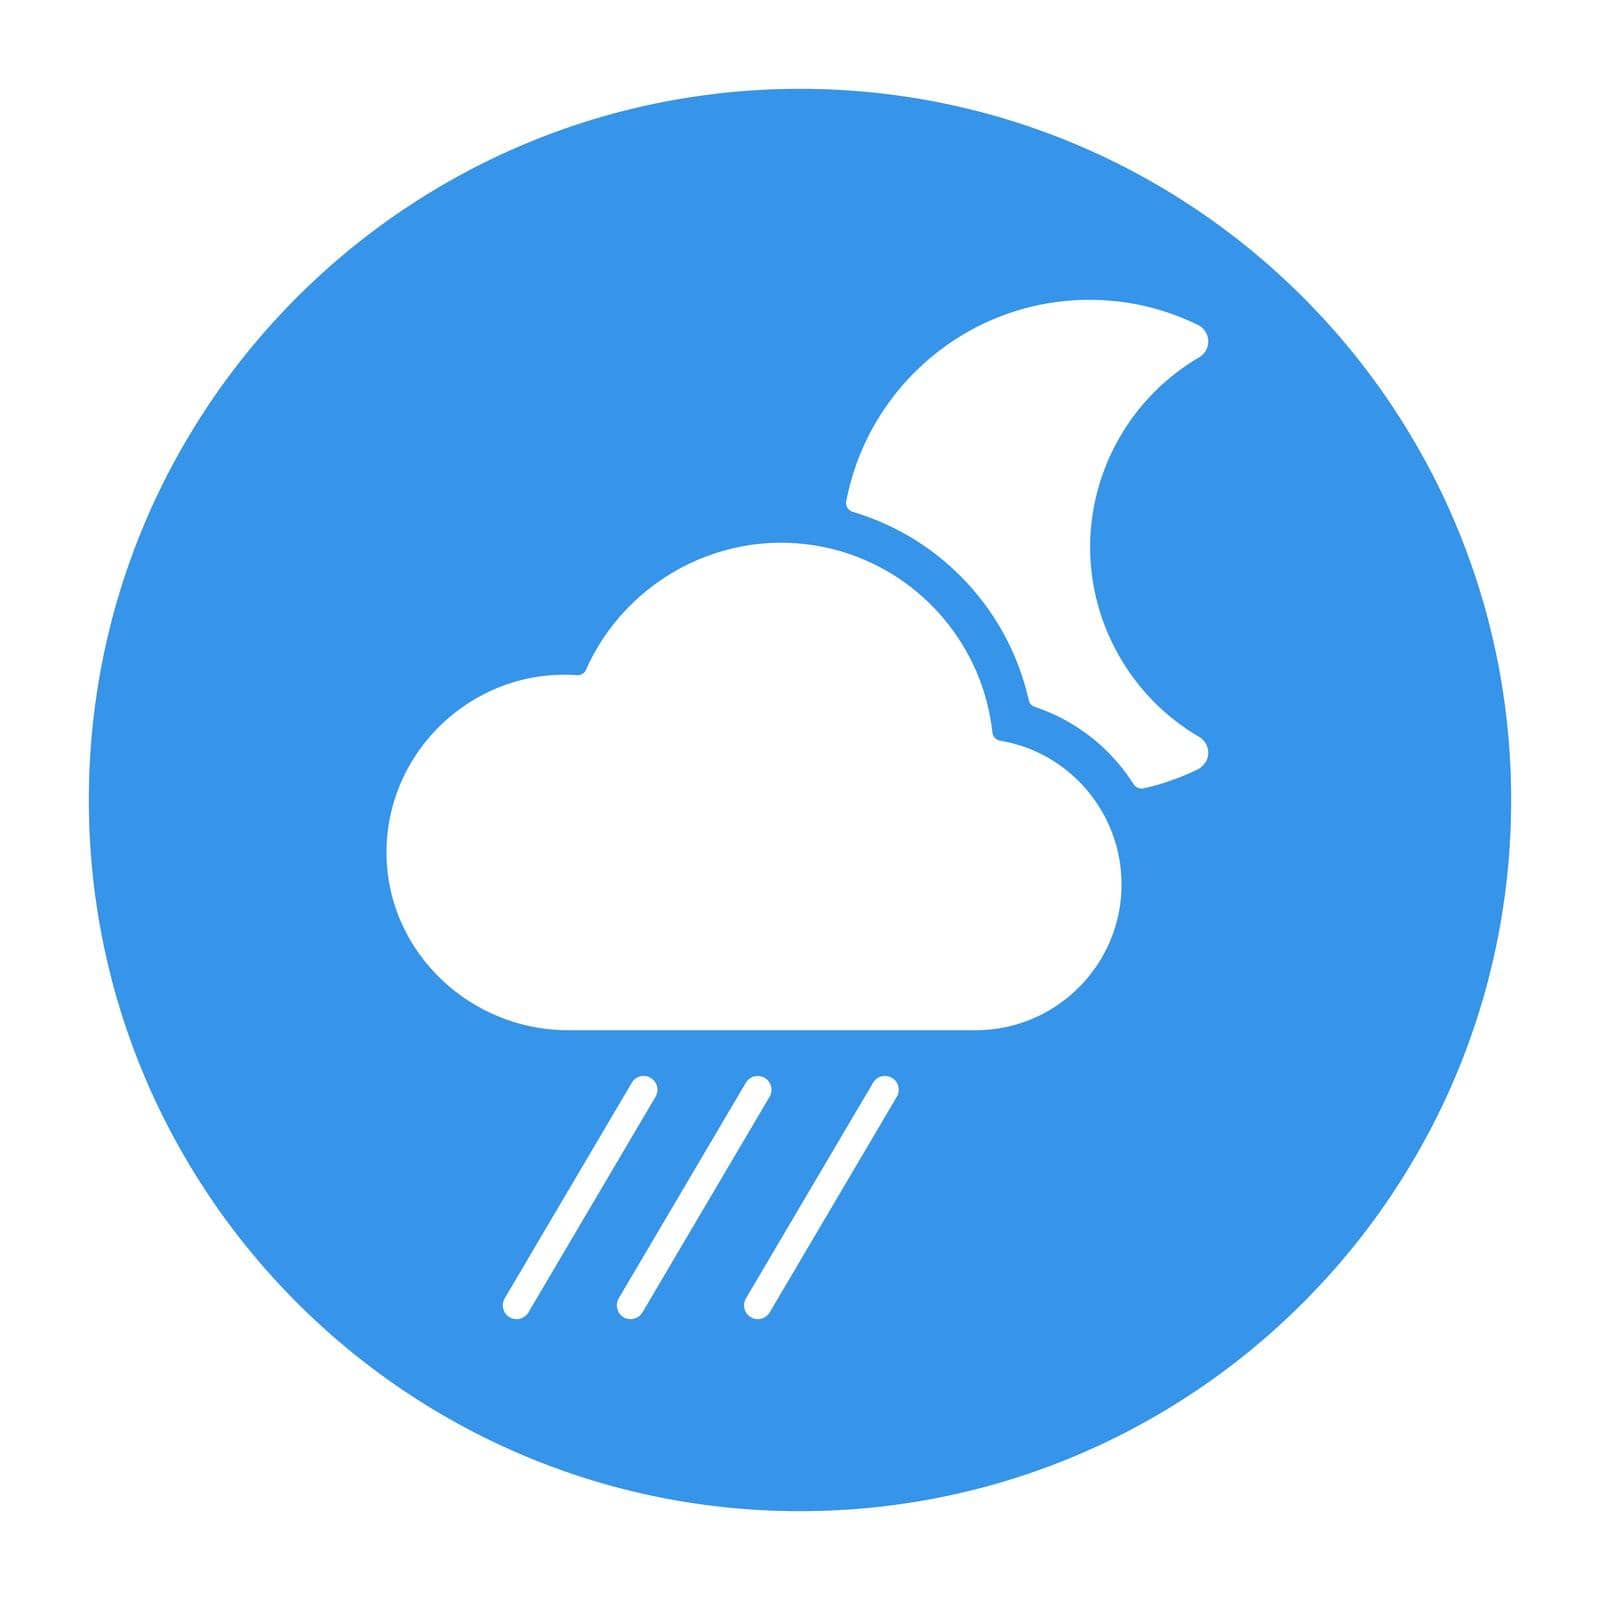 Raincloud with moon glyph icon. Weather sign by nosik